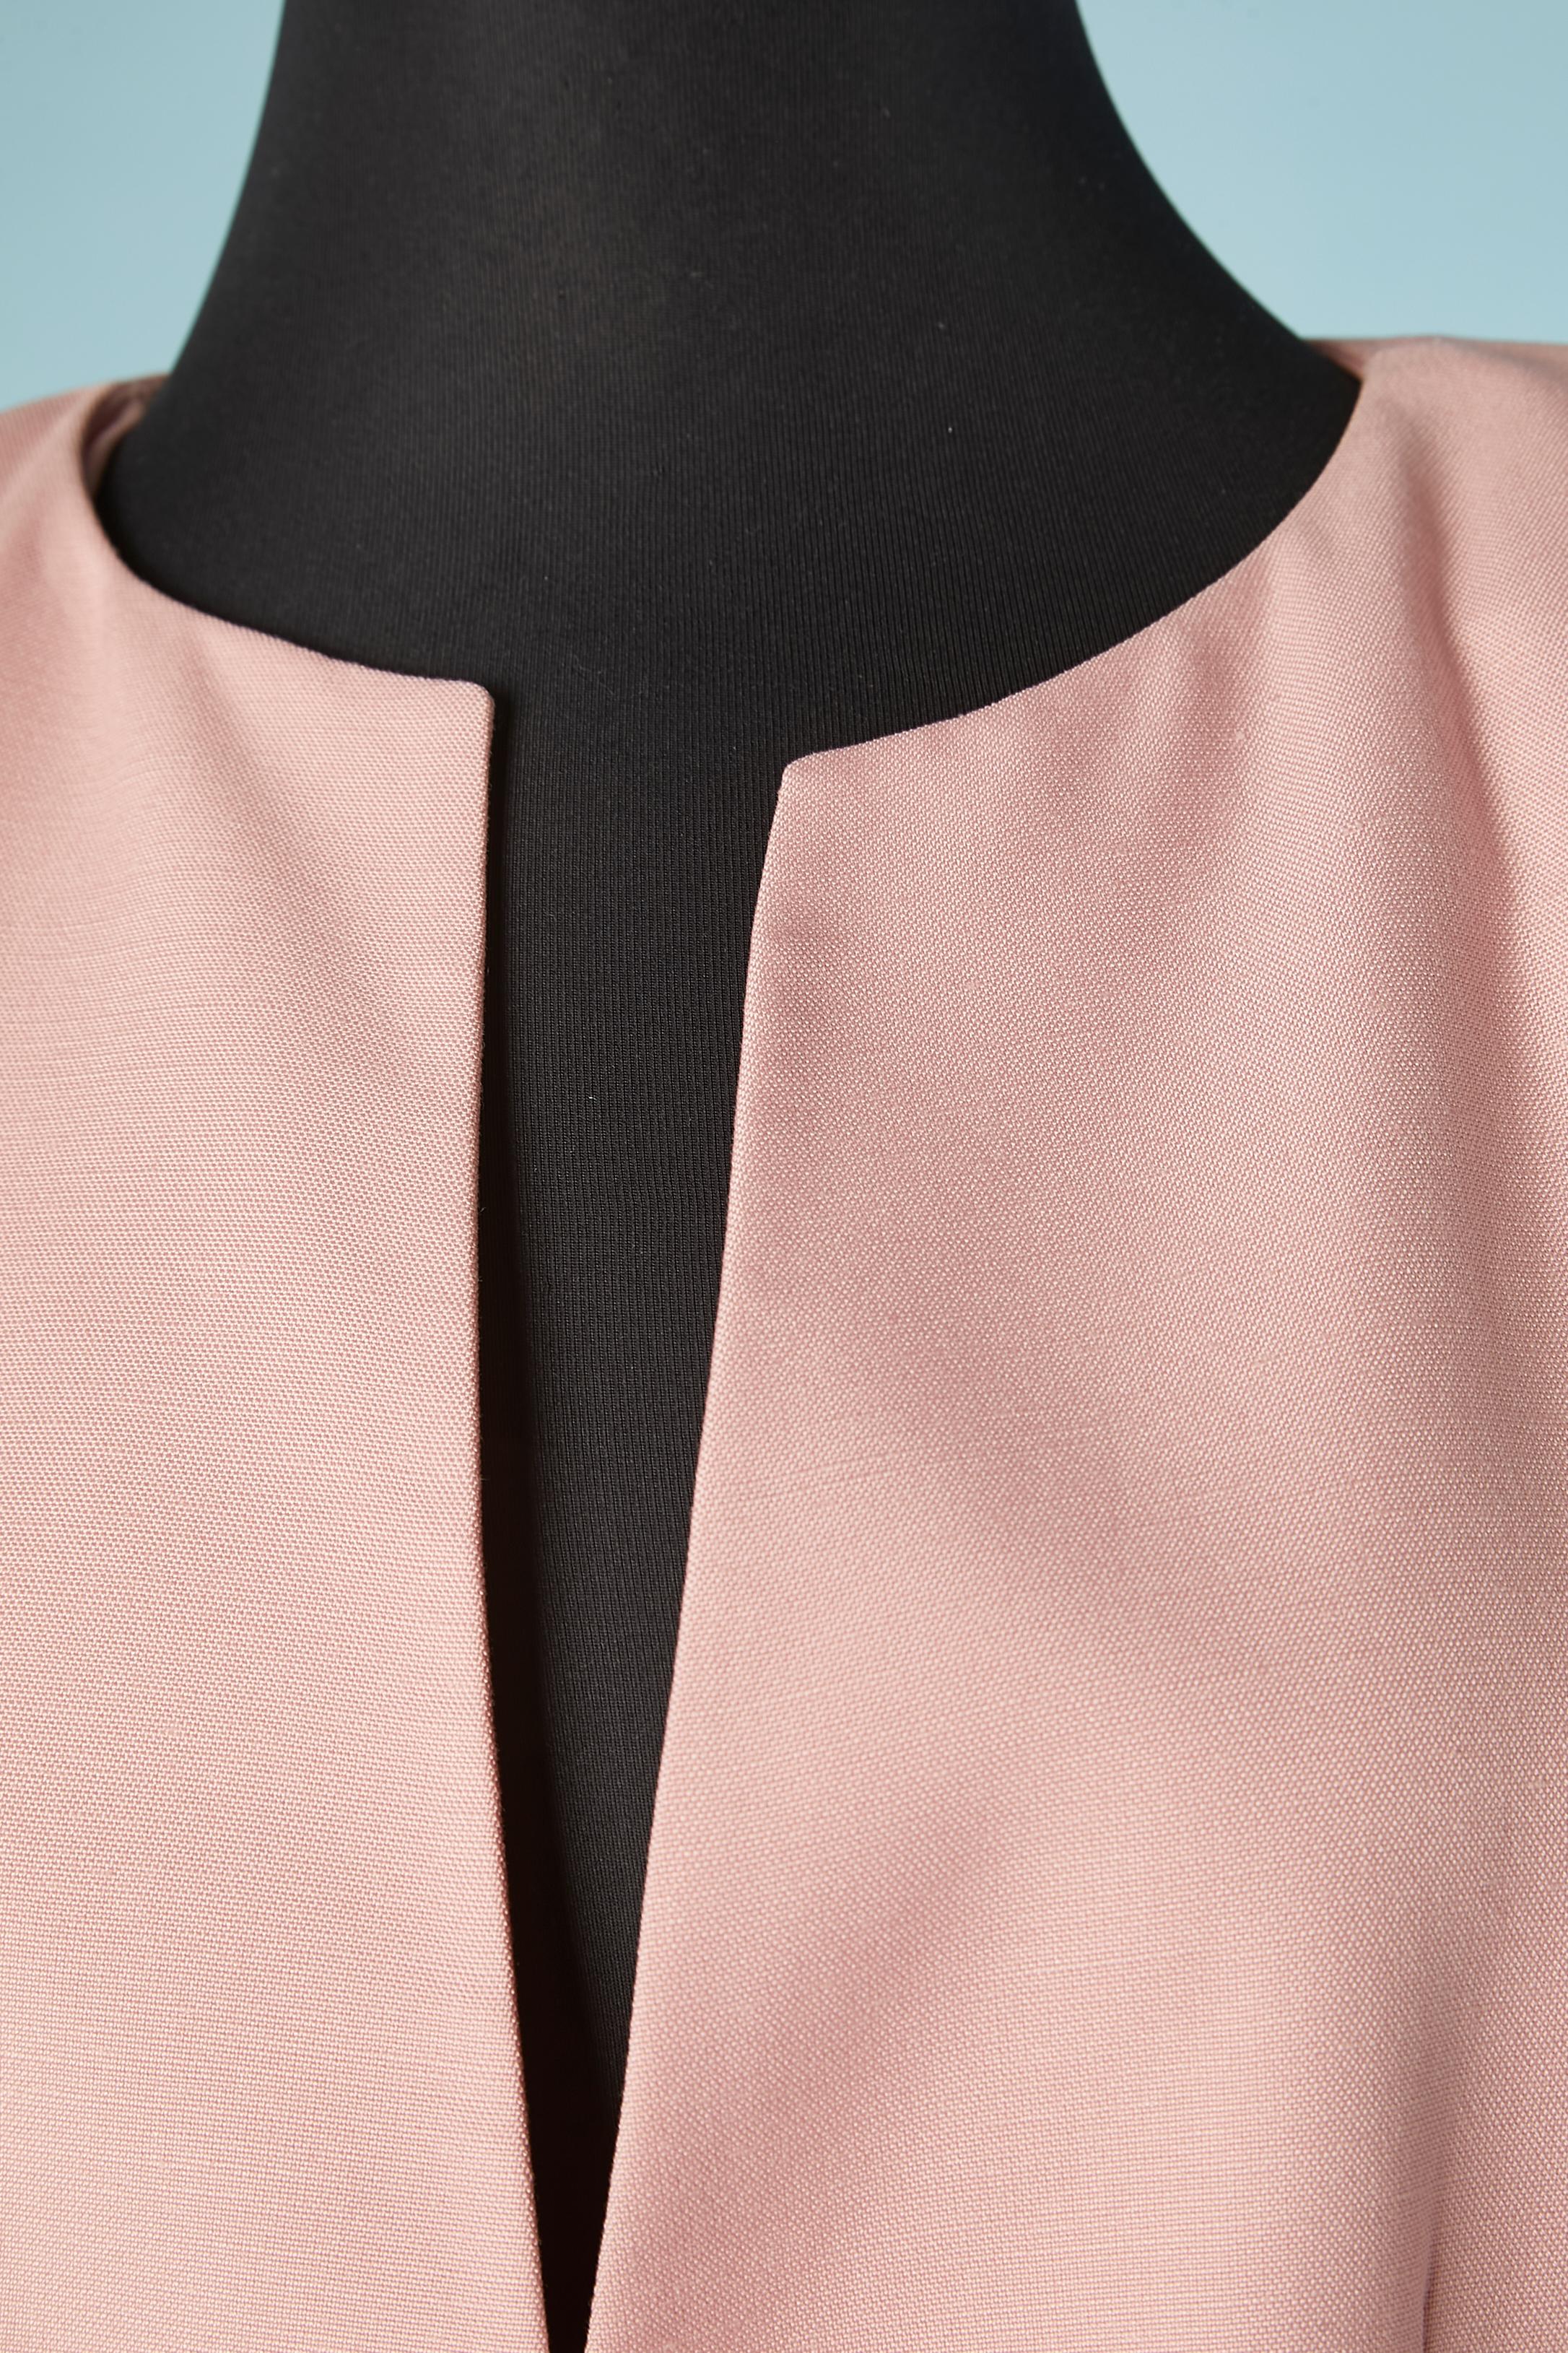 Beige Pink skirt-suit with mother-of-shell button Christian Dior Suit 